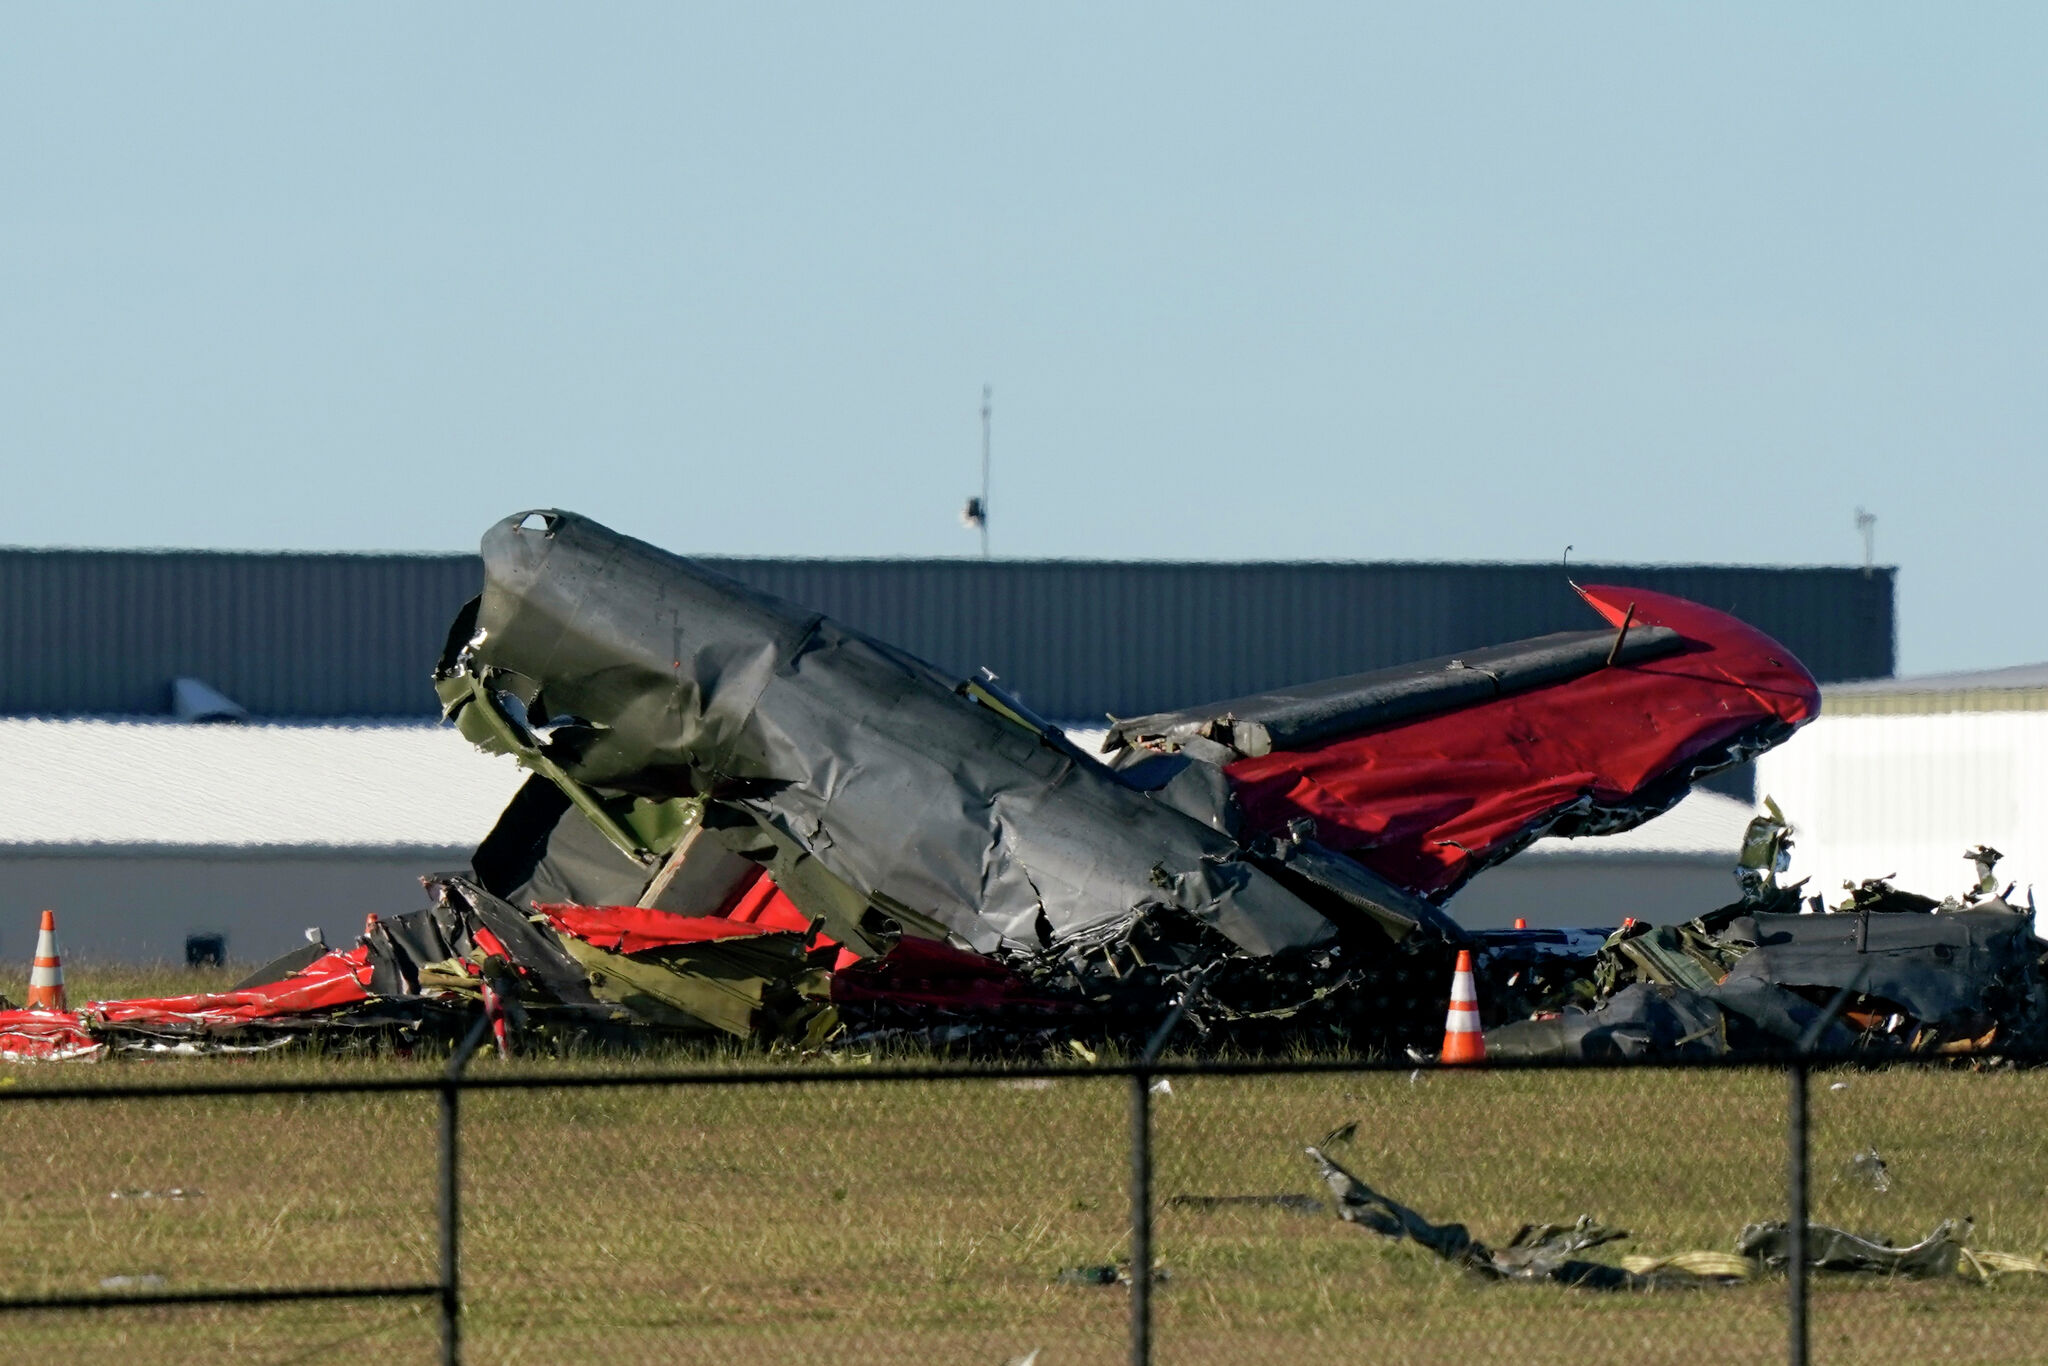 What we know about the planes, including the B17 that crashed at